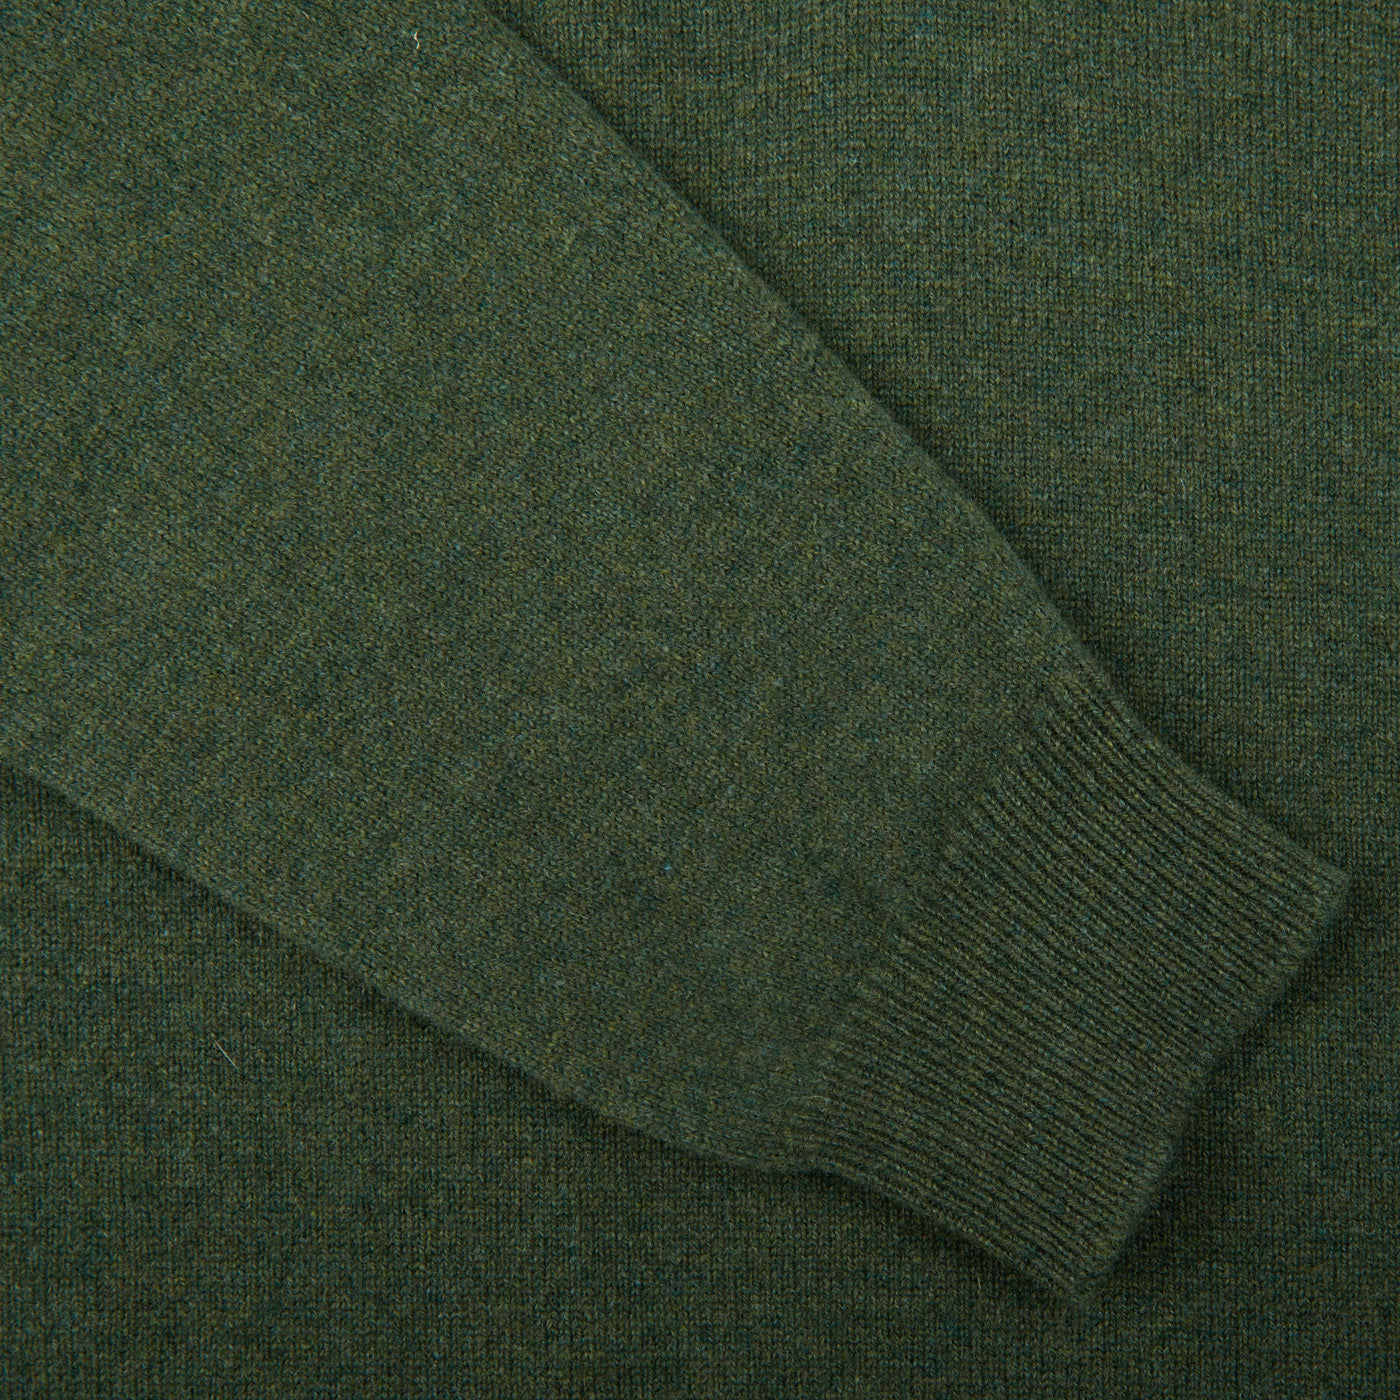 A close up of a Rosemary Green V-Neck Lambswool Sweater made by William Lockie.